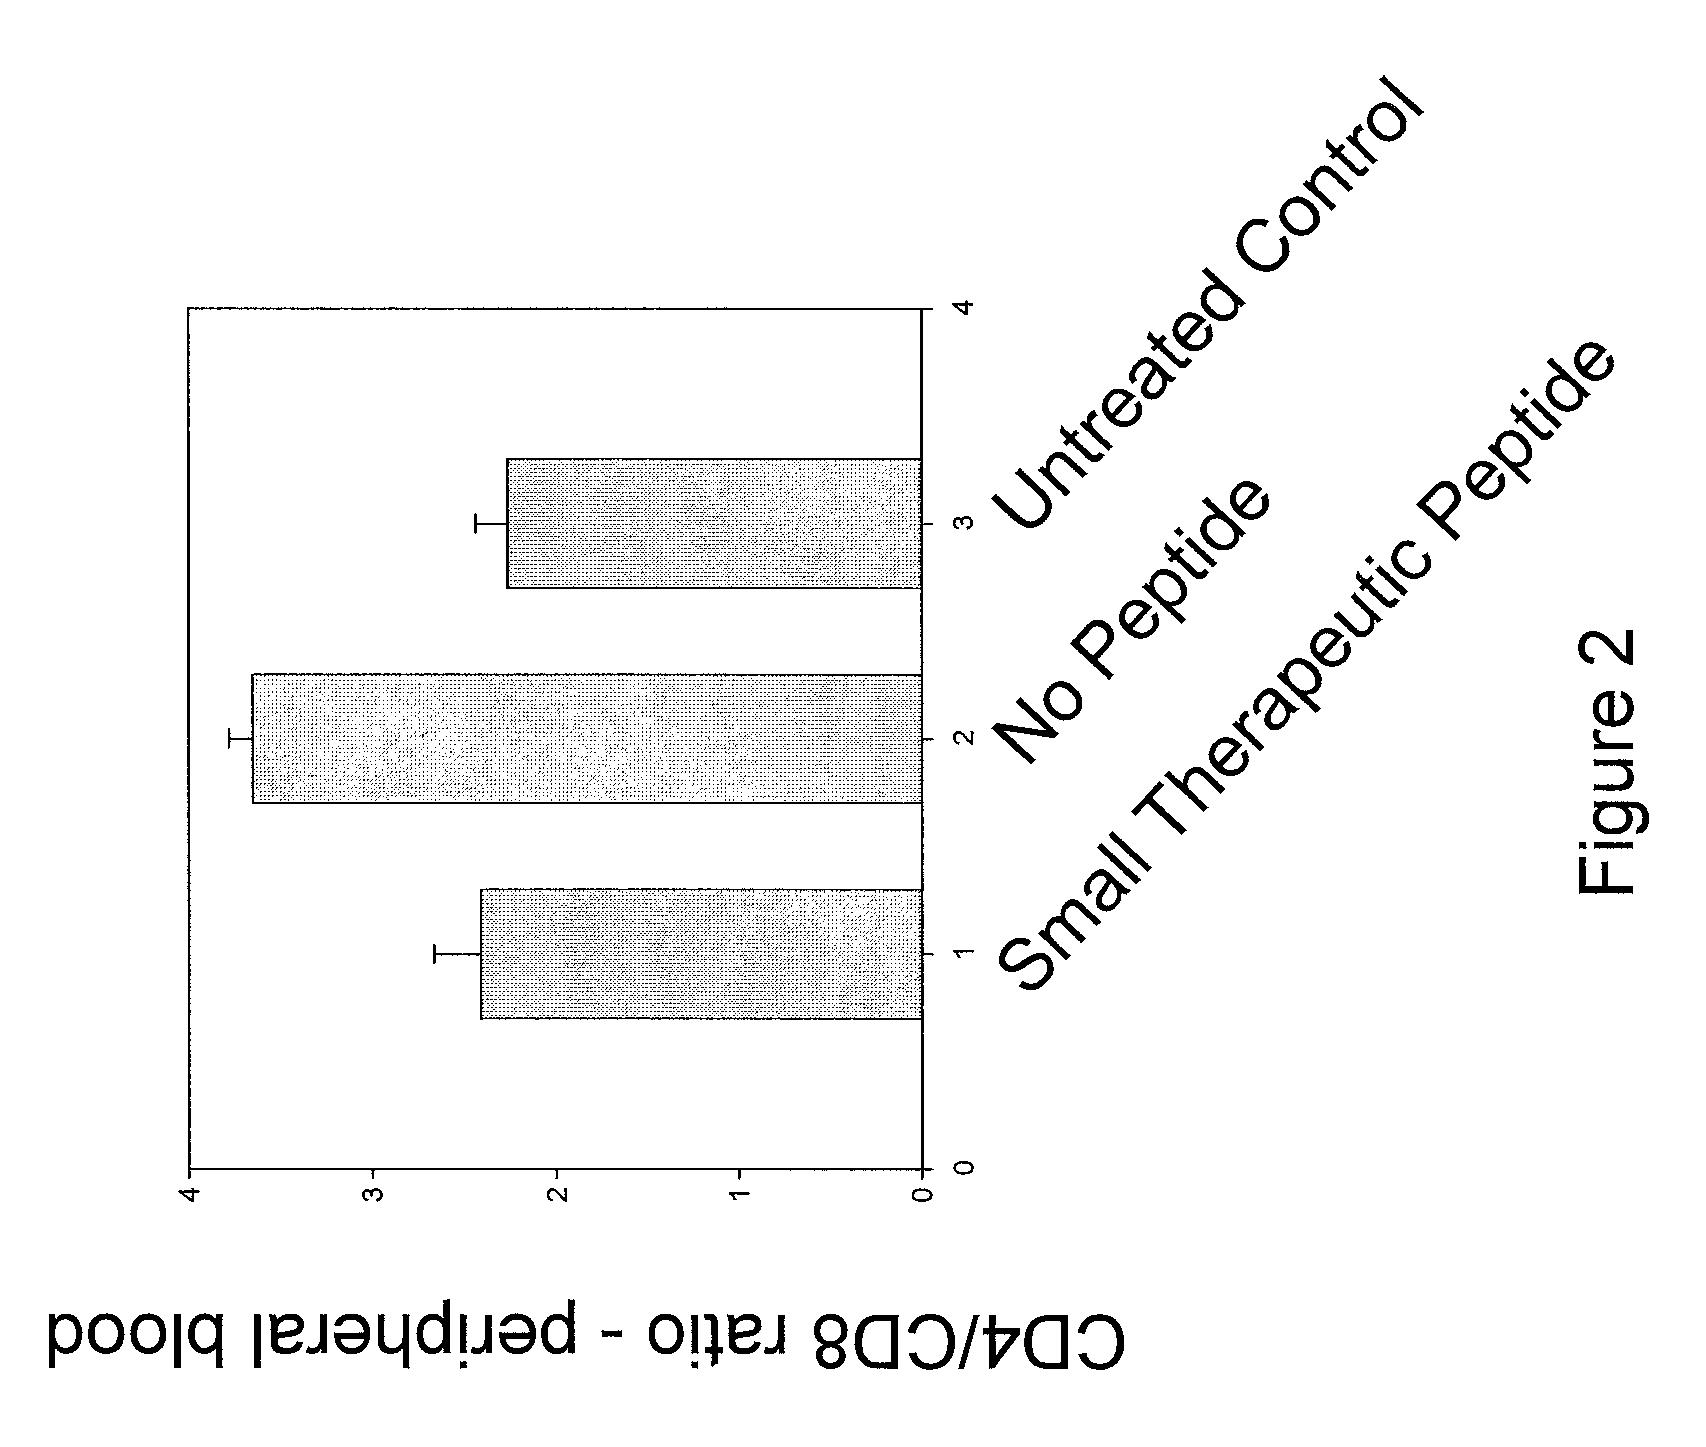 Pegylated CD154 peptides and methods of inhibiting CD40 interacations with CD154